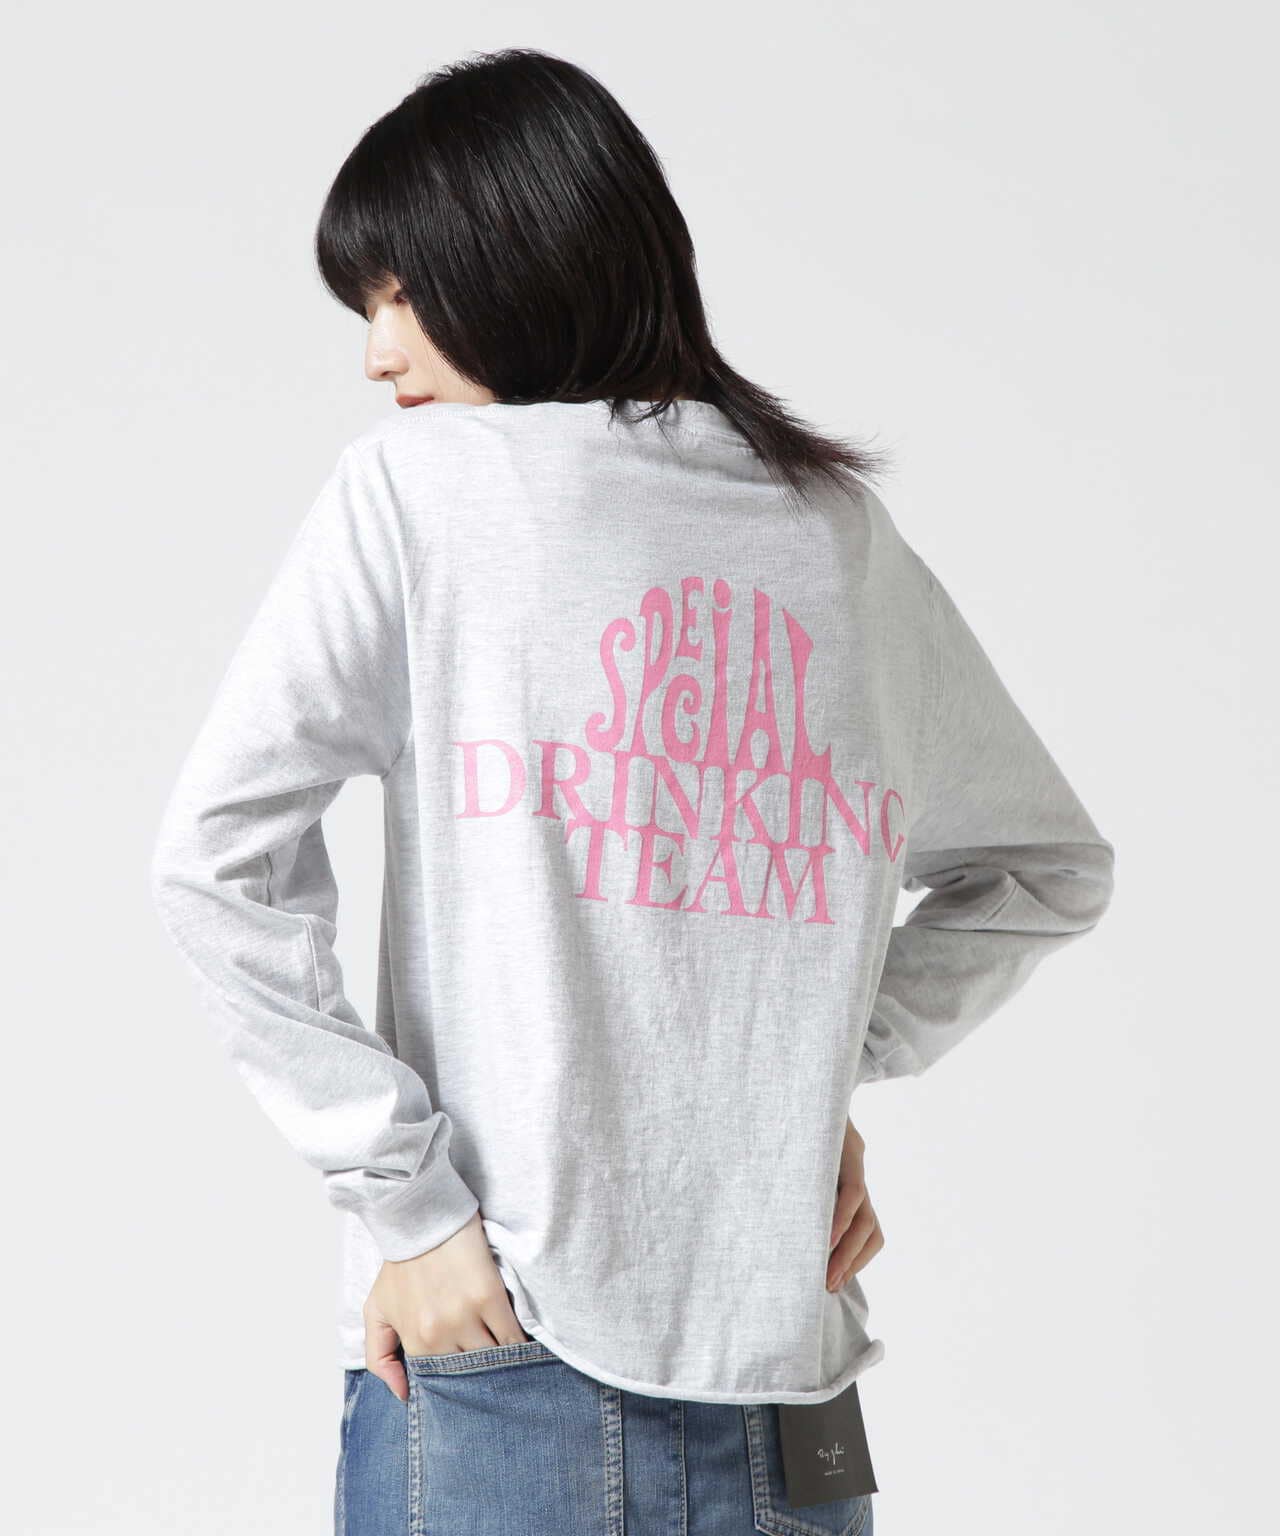 THE DAY ON THE BEACH/ザデイオンザビーチ　CUT OFF L/S SPECIAL DRINKING